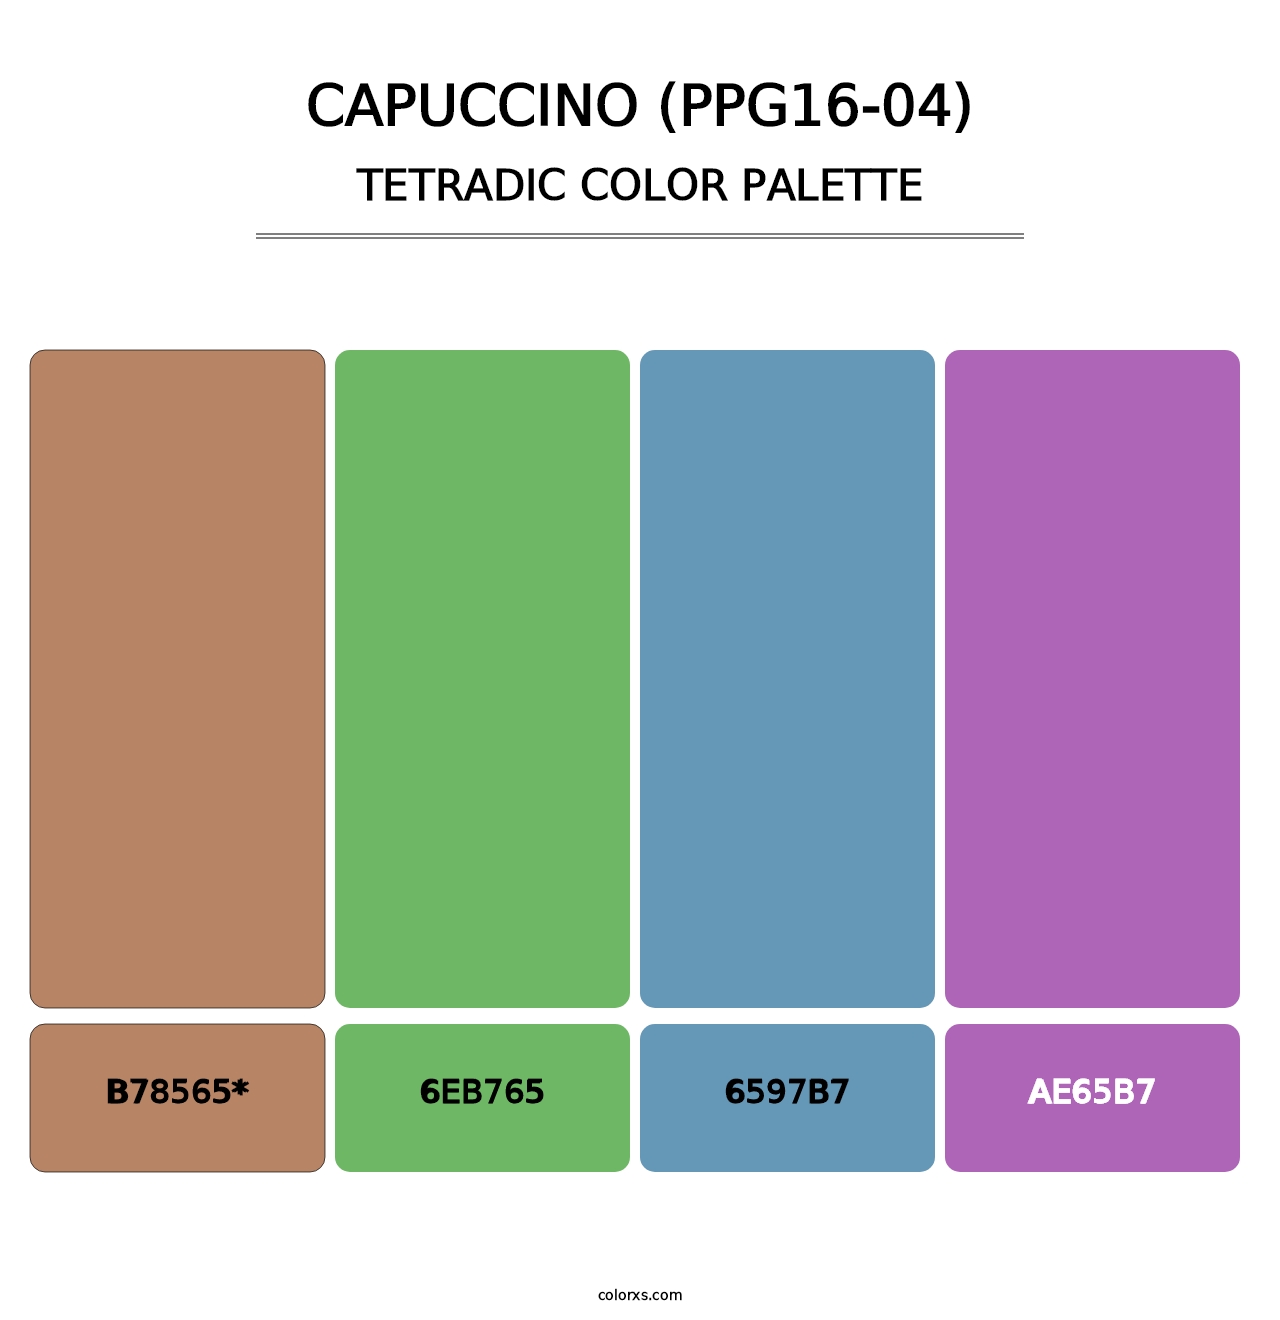 Capuccino (PPG16-04) - Tetradic Color Palette